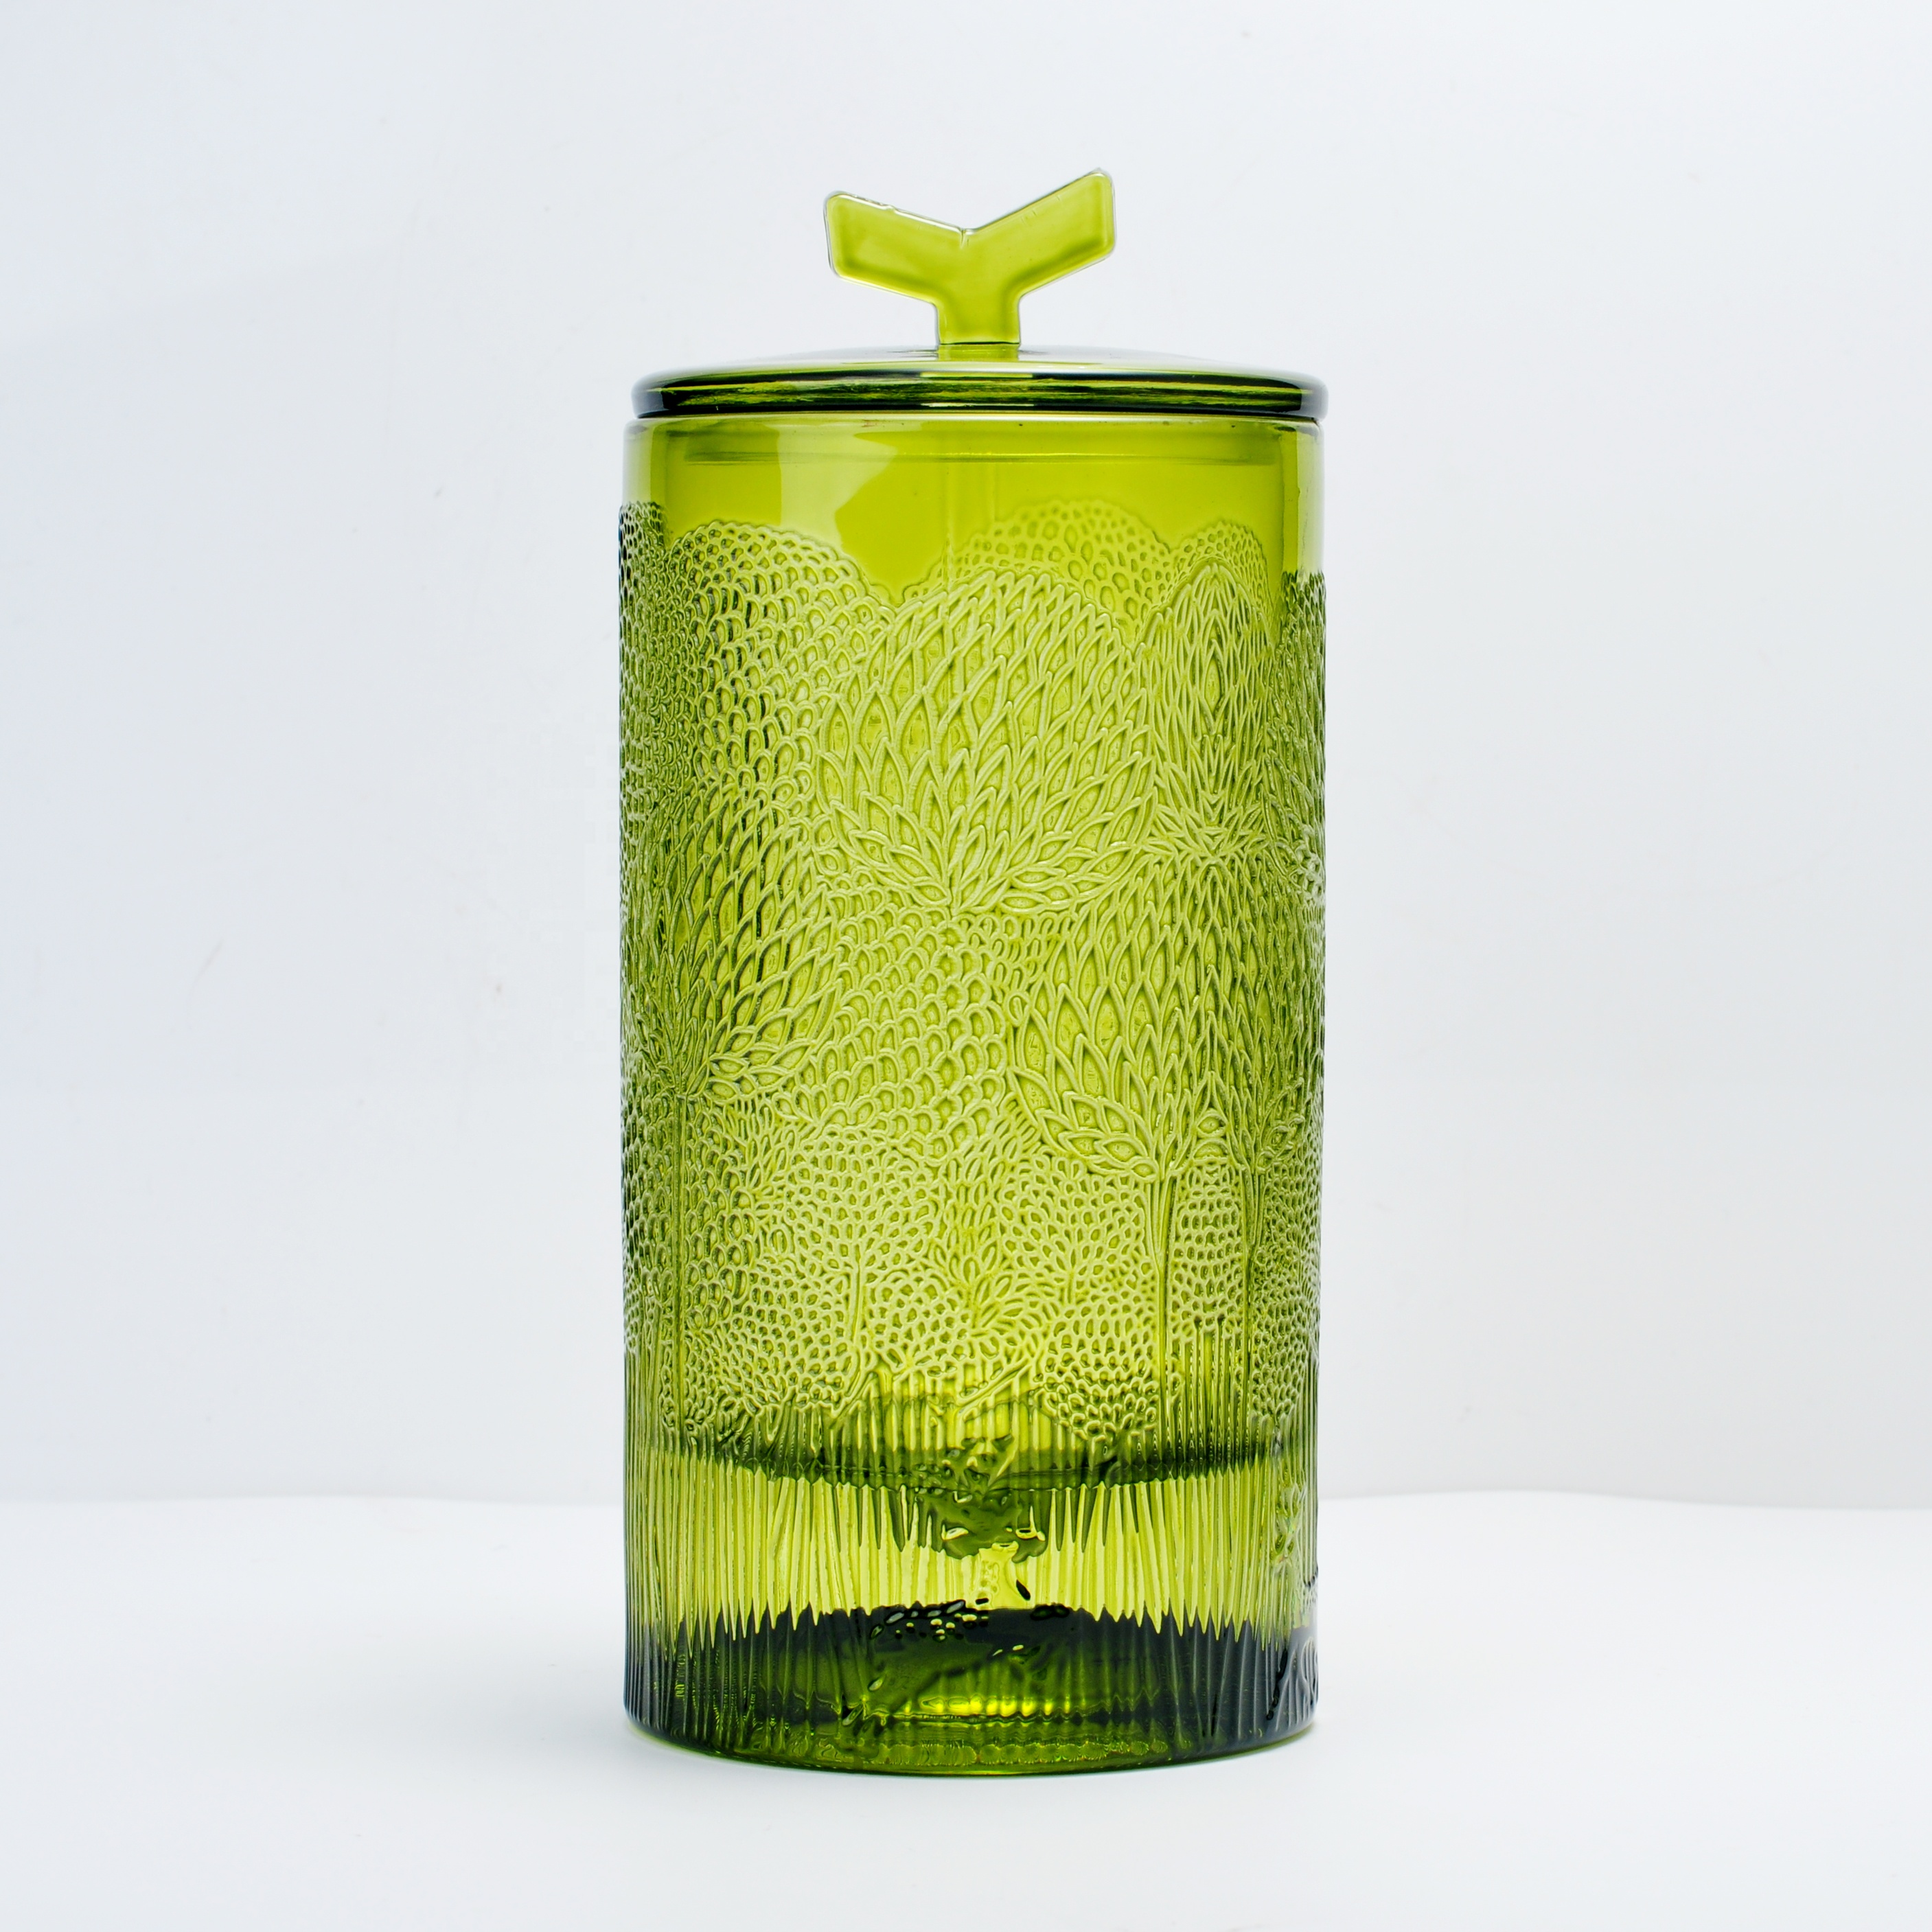 Sunny design green spraying luxury glass candle vessel with lid